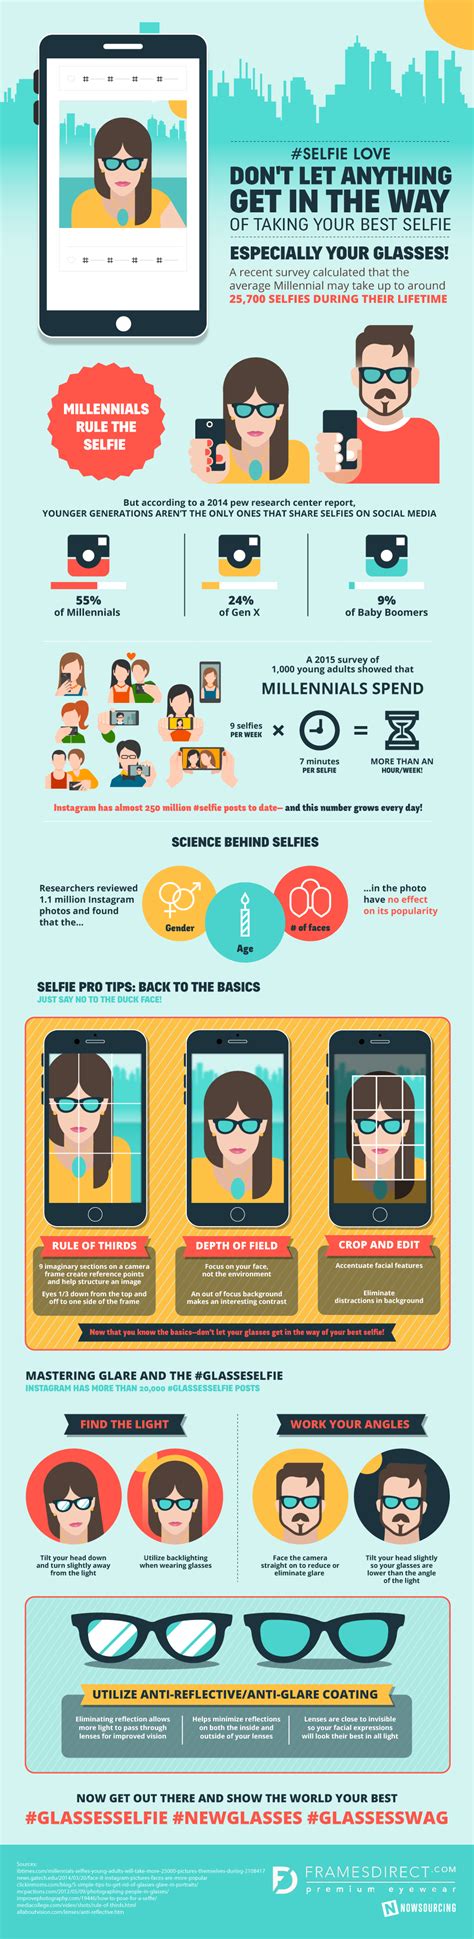 How To Take A Good Selfie Even In Glasses